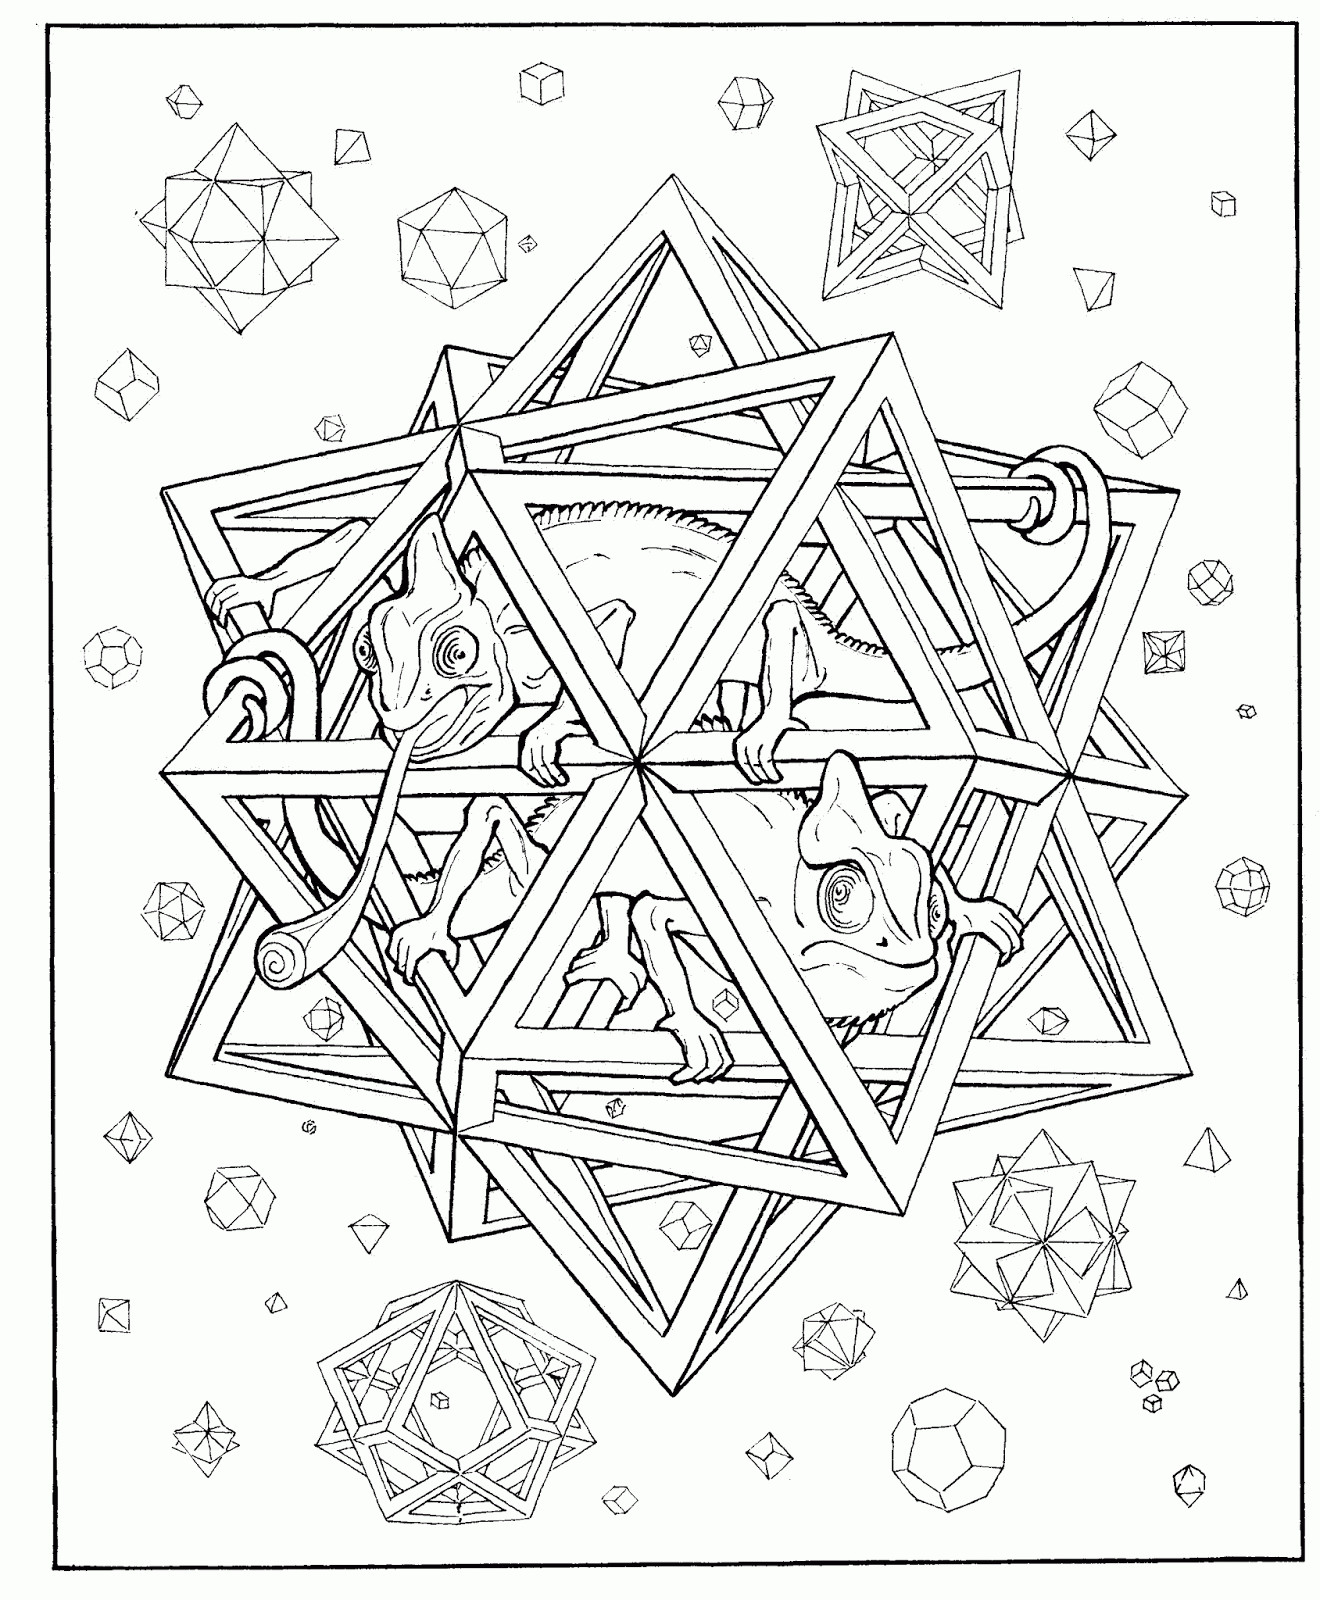 Trippy Coloring Book Pages
 50 Trippy Coloring Pages